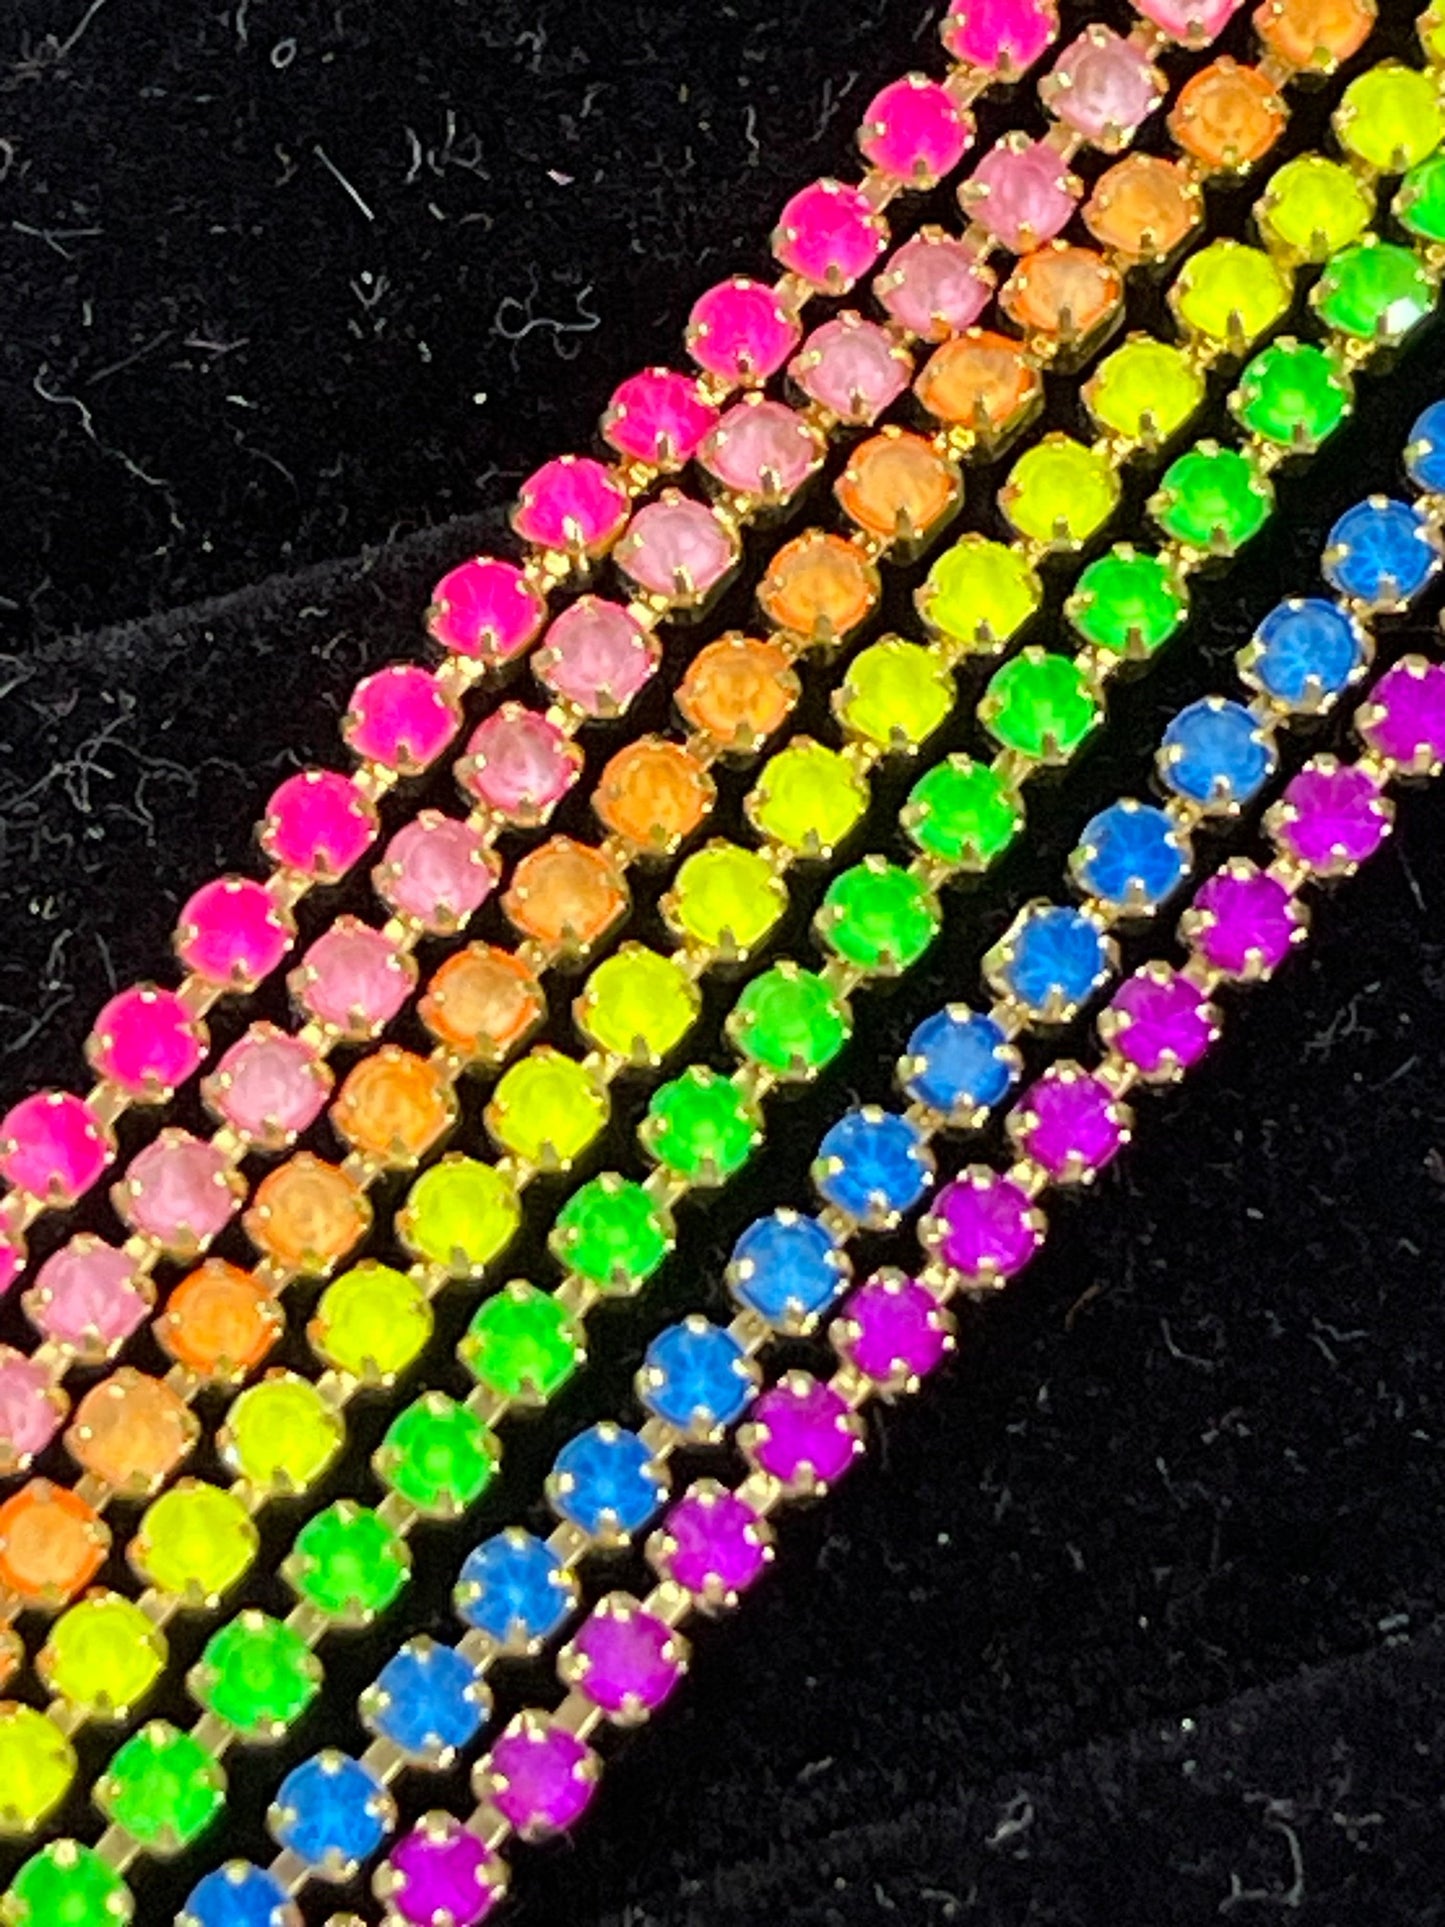 Opal Neon Rainbow  6 x 1 yard Ss6 Mixed Coloured Metal Rhinestone Metal Set, Promotions Promotions